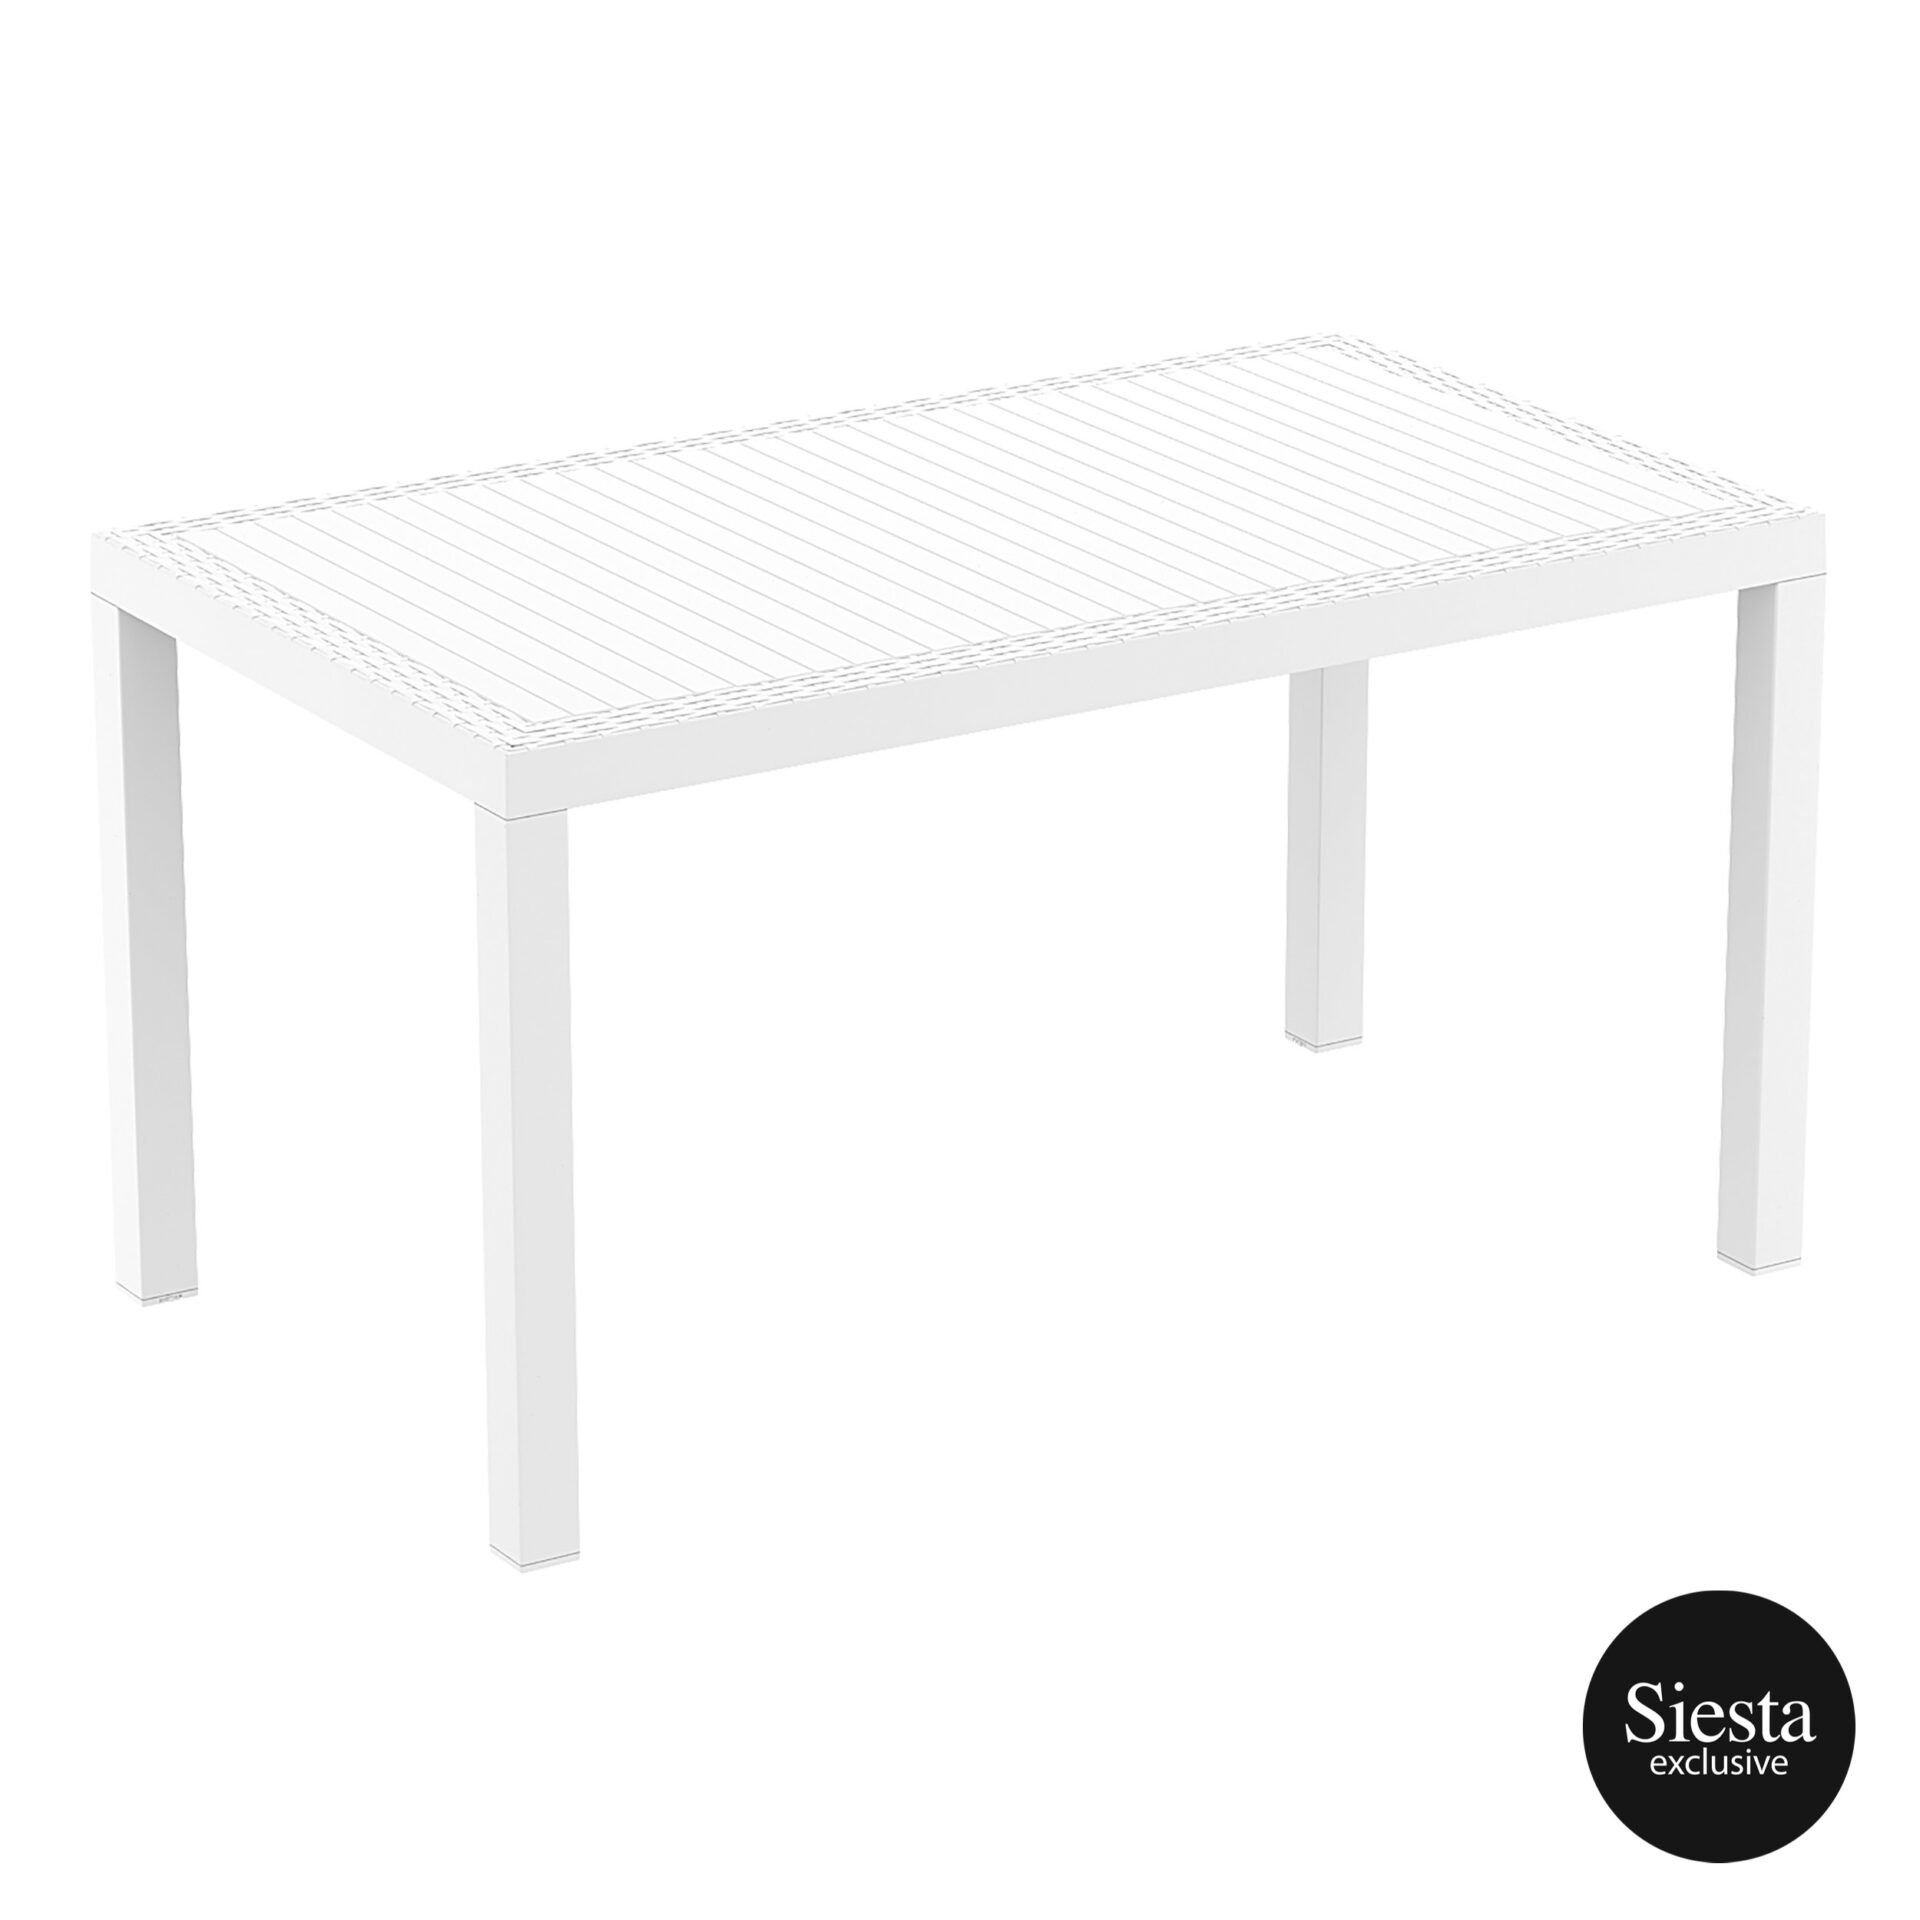 outdoor resin rattan cafe plastic top bali table 140 white front side